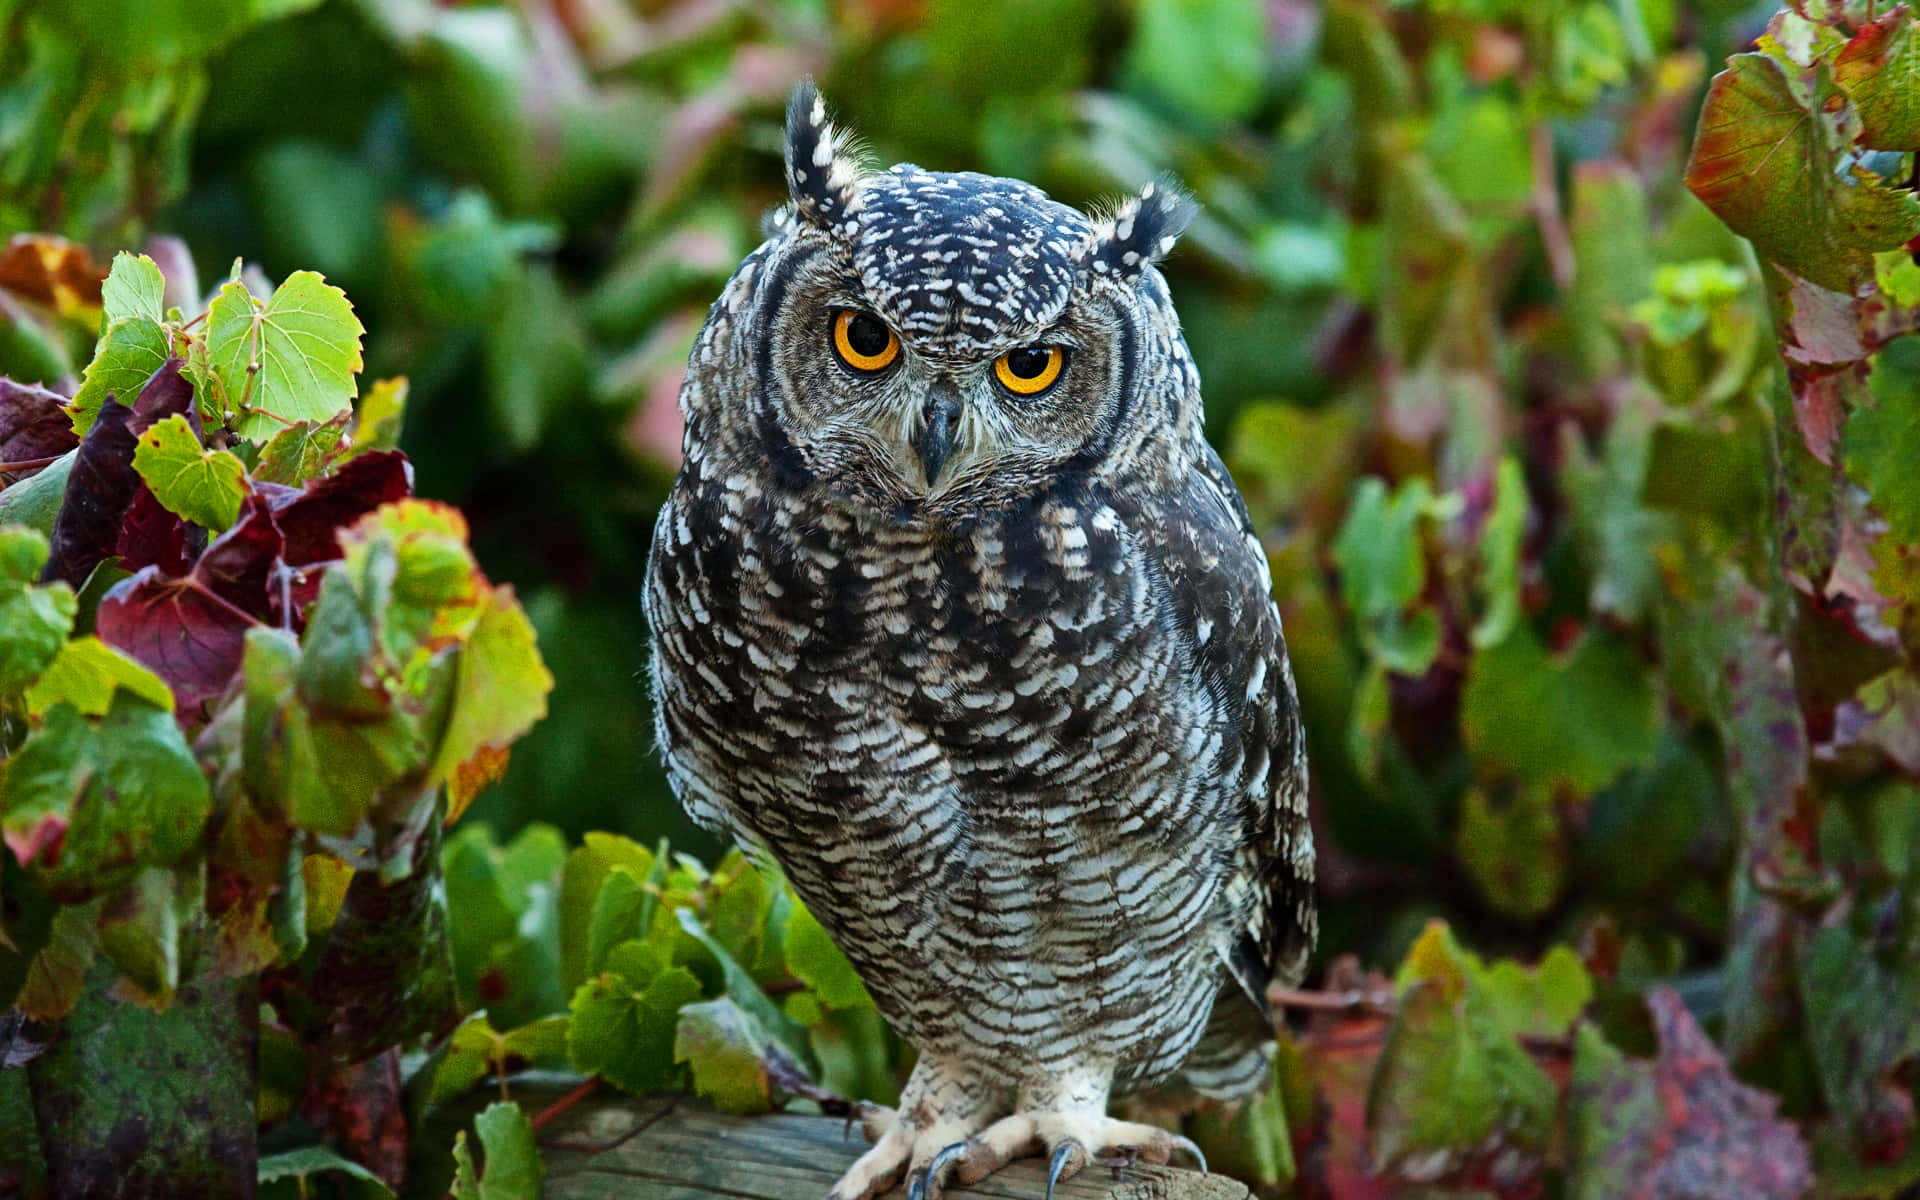 A Sweet Little Owl Blinking at You